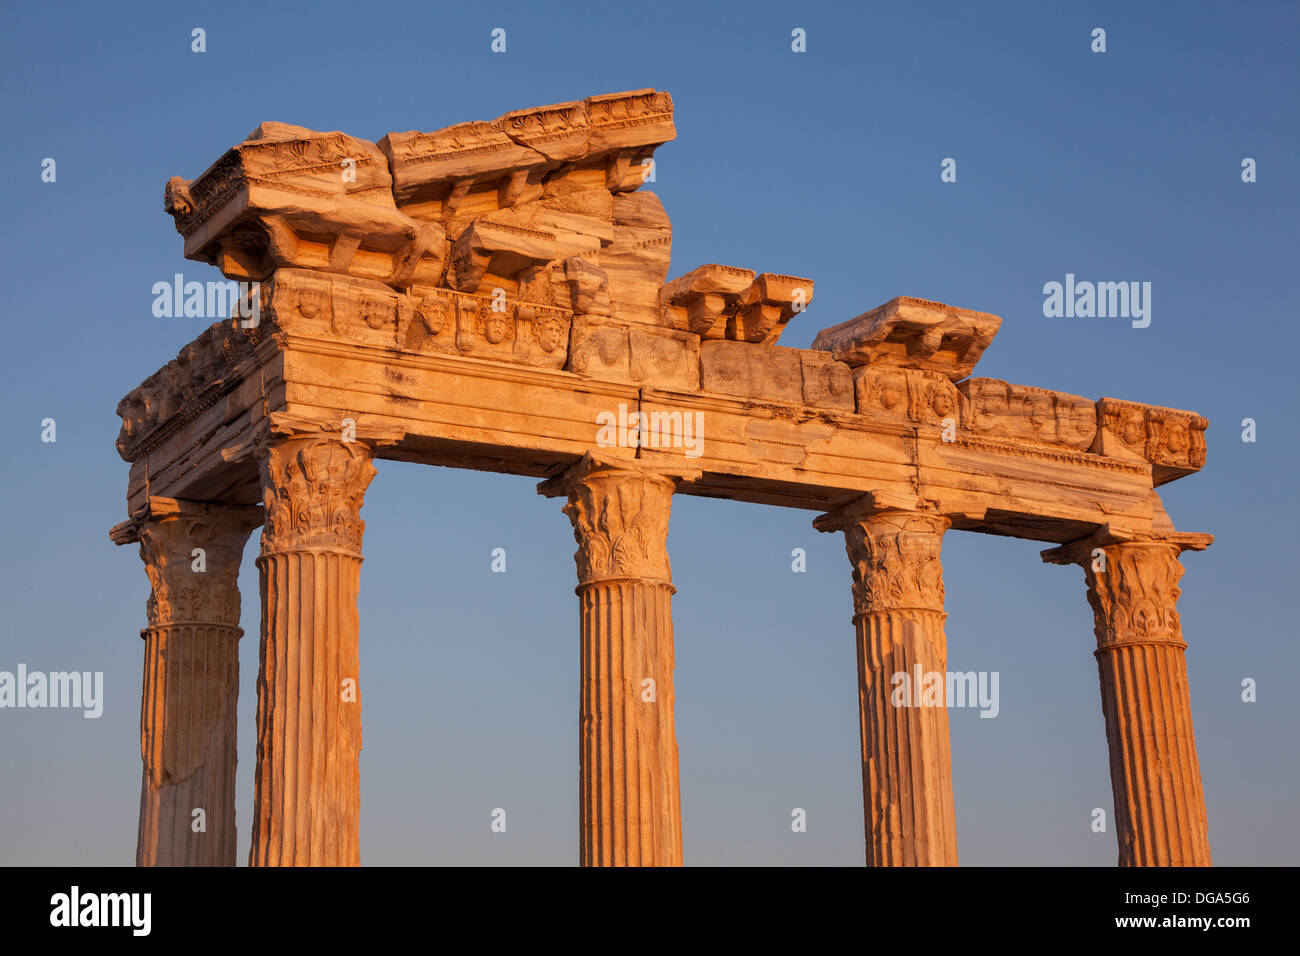 Ancient ruins of Roman Empire ( construction date about II century) at sunset. Apollo Temple, Side, Turkey. Stock Photo